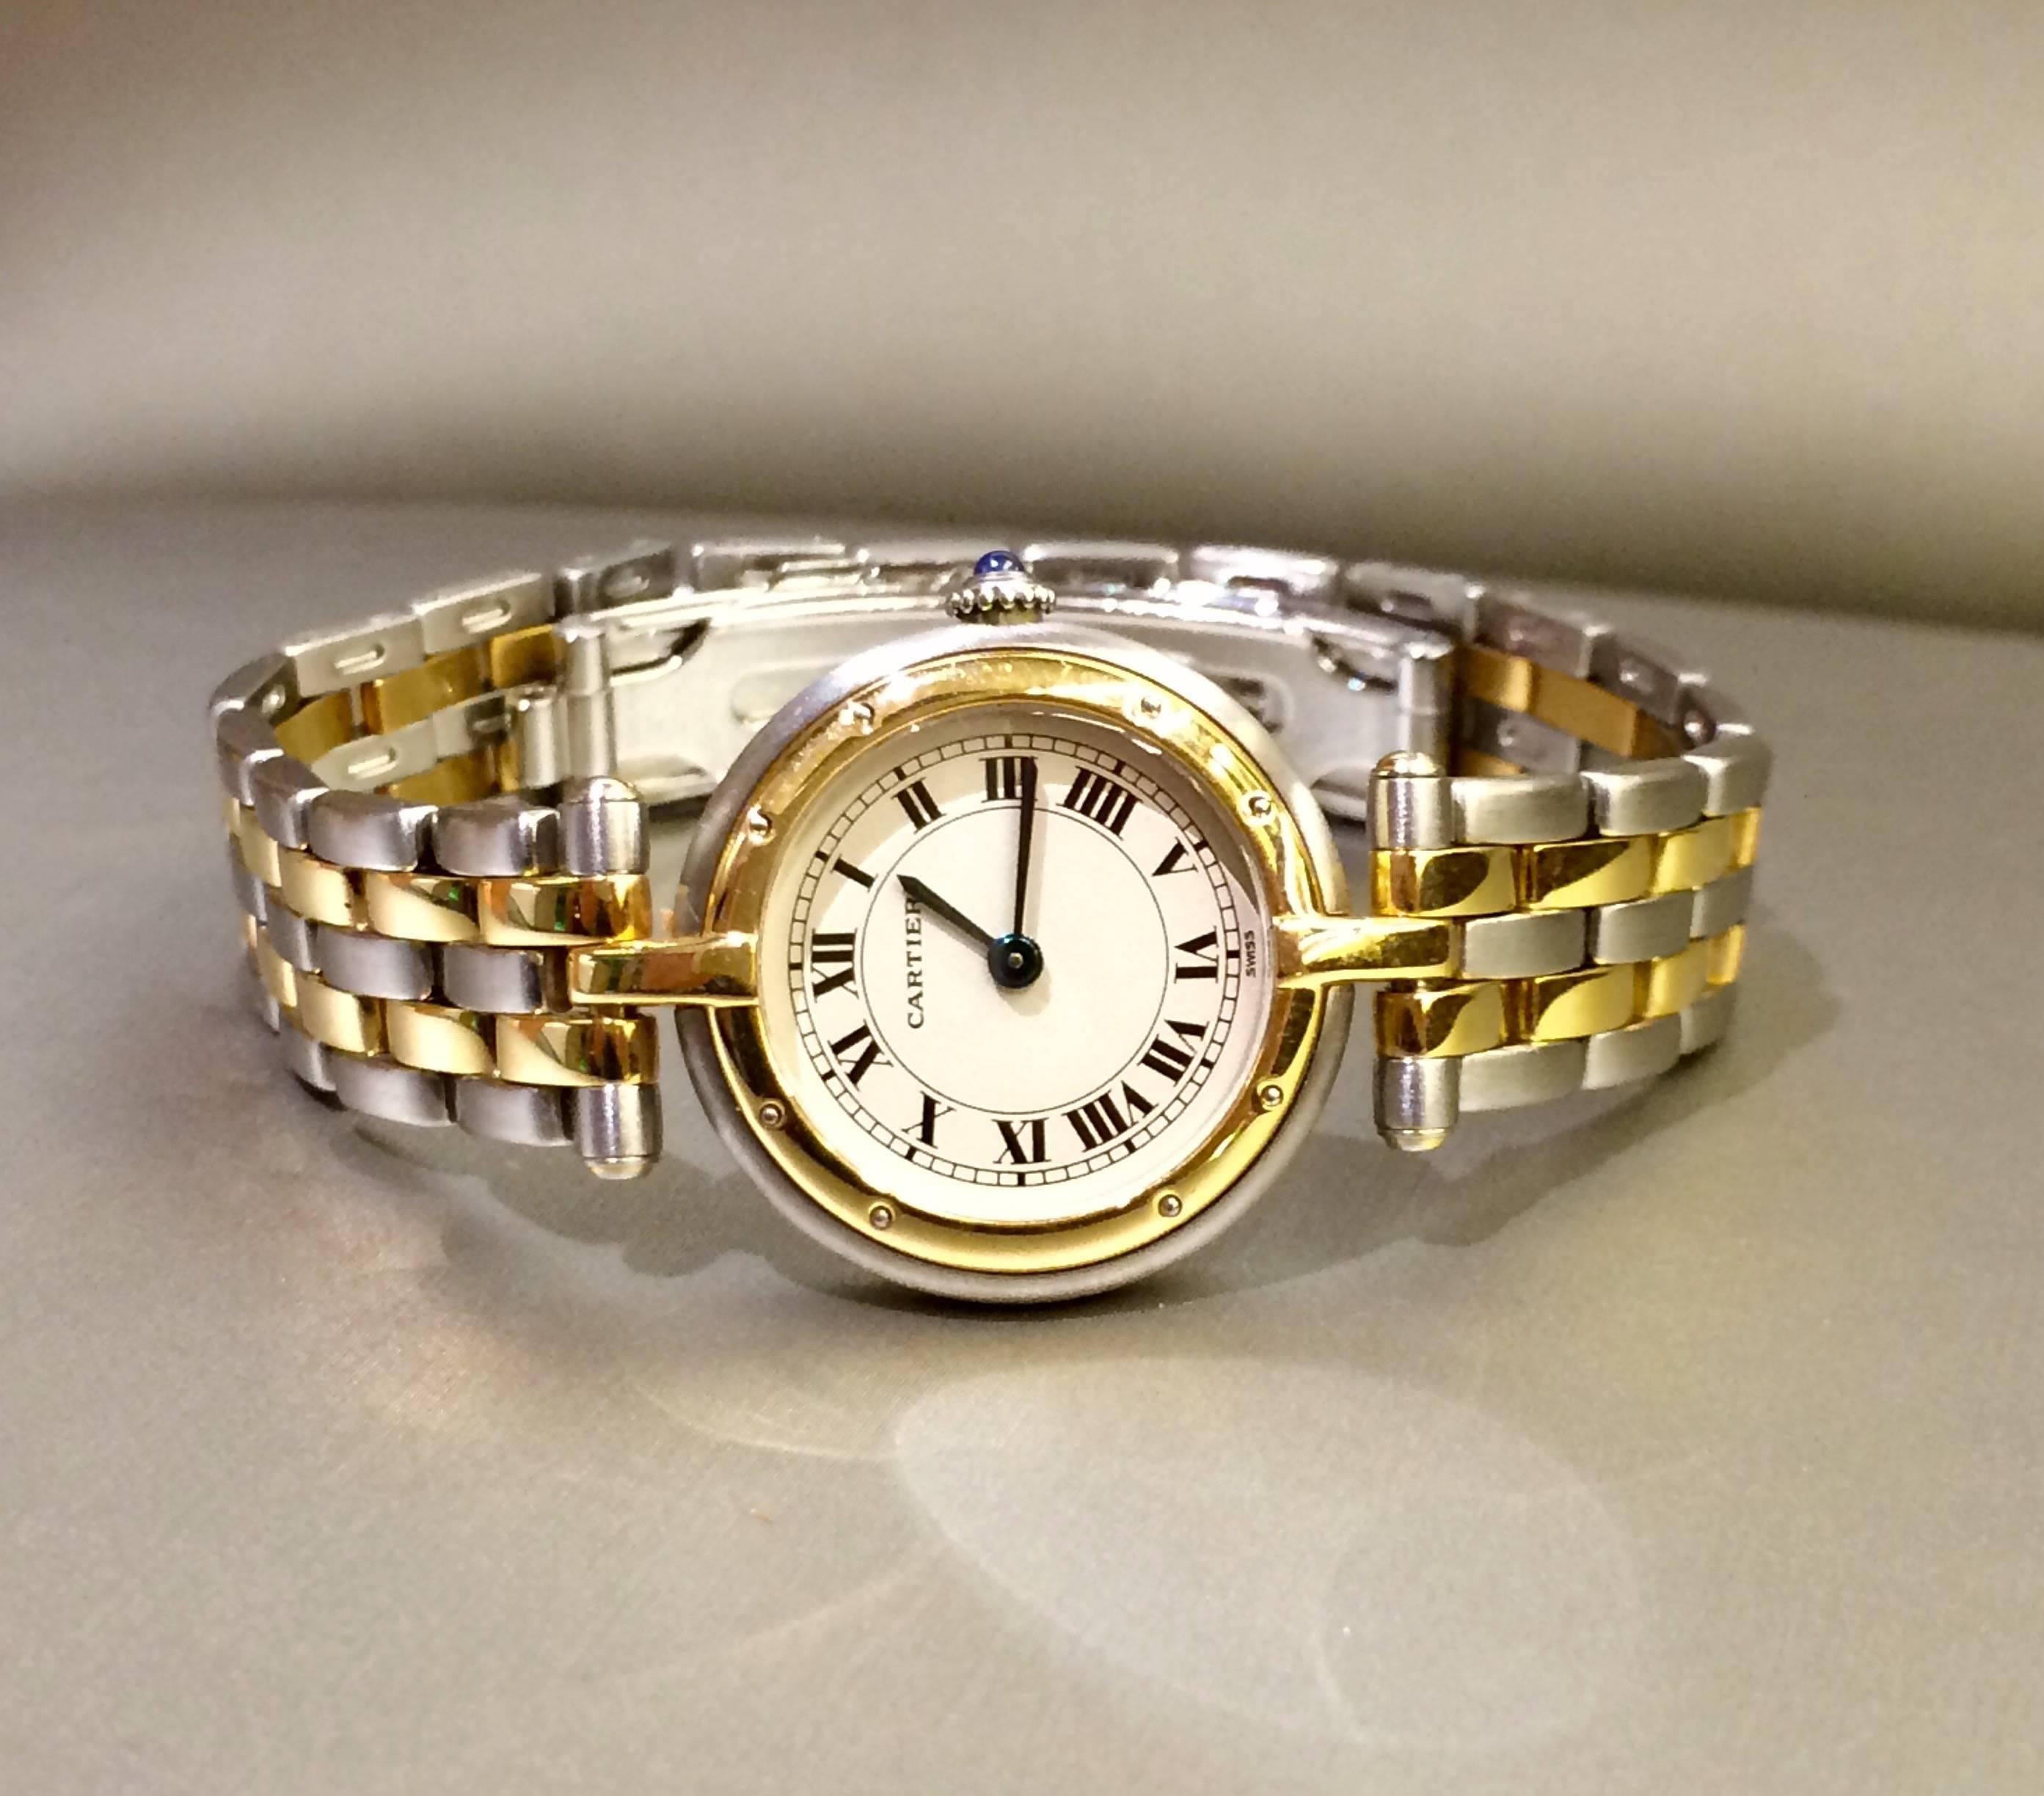 Cartier Panthere Ronde Collection timepiece, features a mix of yellow-gold and silver finishes, this exquisite pre-owned watch graces your wrist with Cartier cachet. Feel confident in any setting when you wear this chic timepiece with a precision